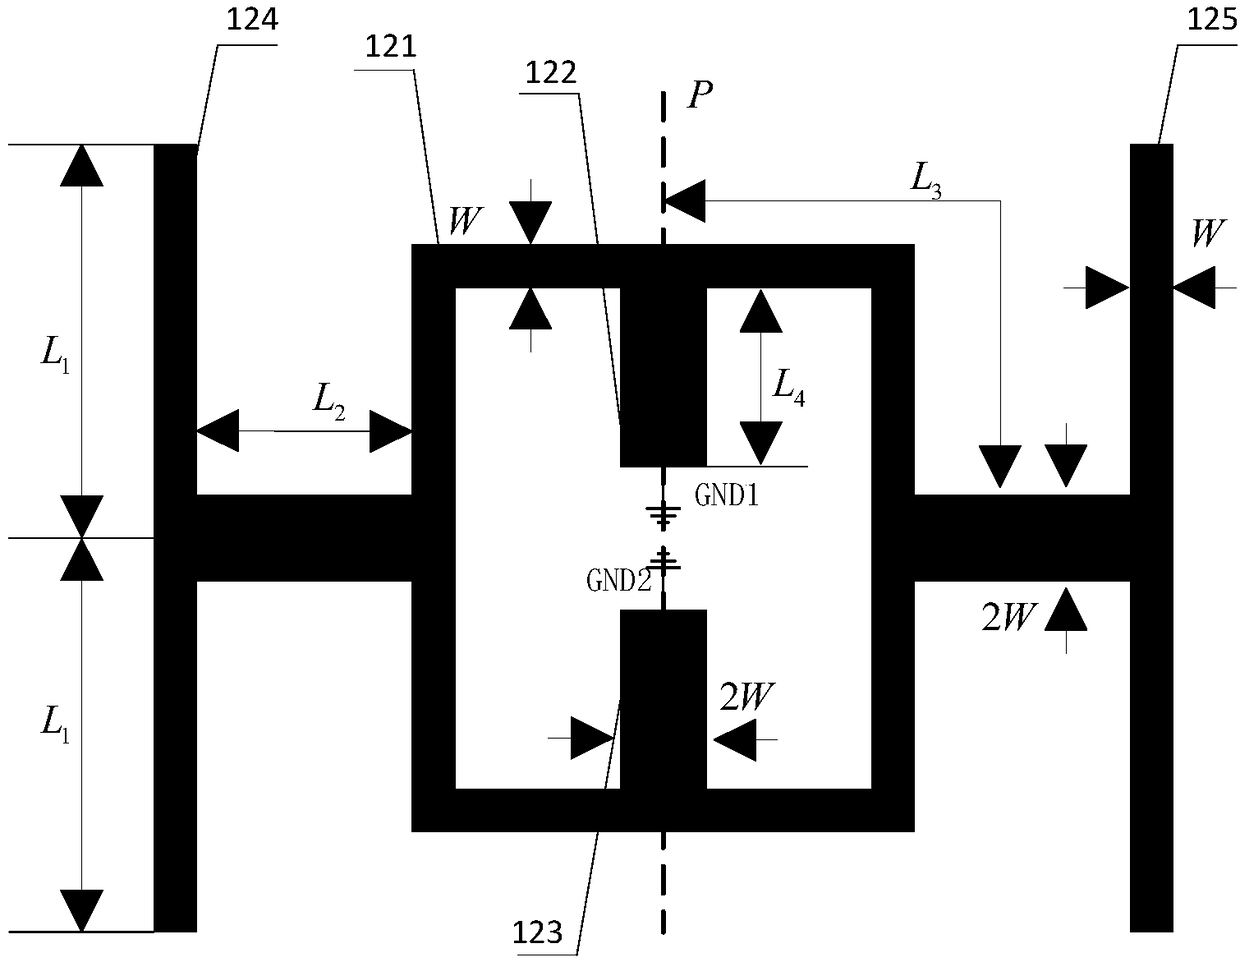 Dual-passband power amplifier integrated with filter